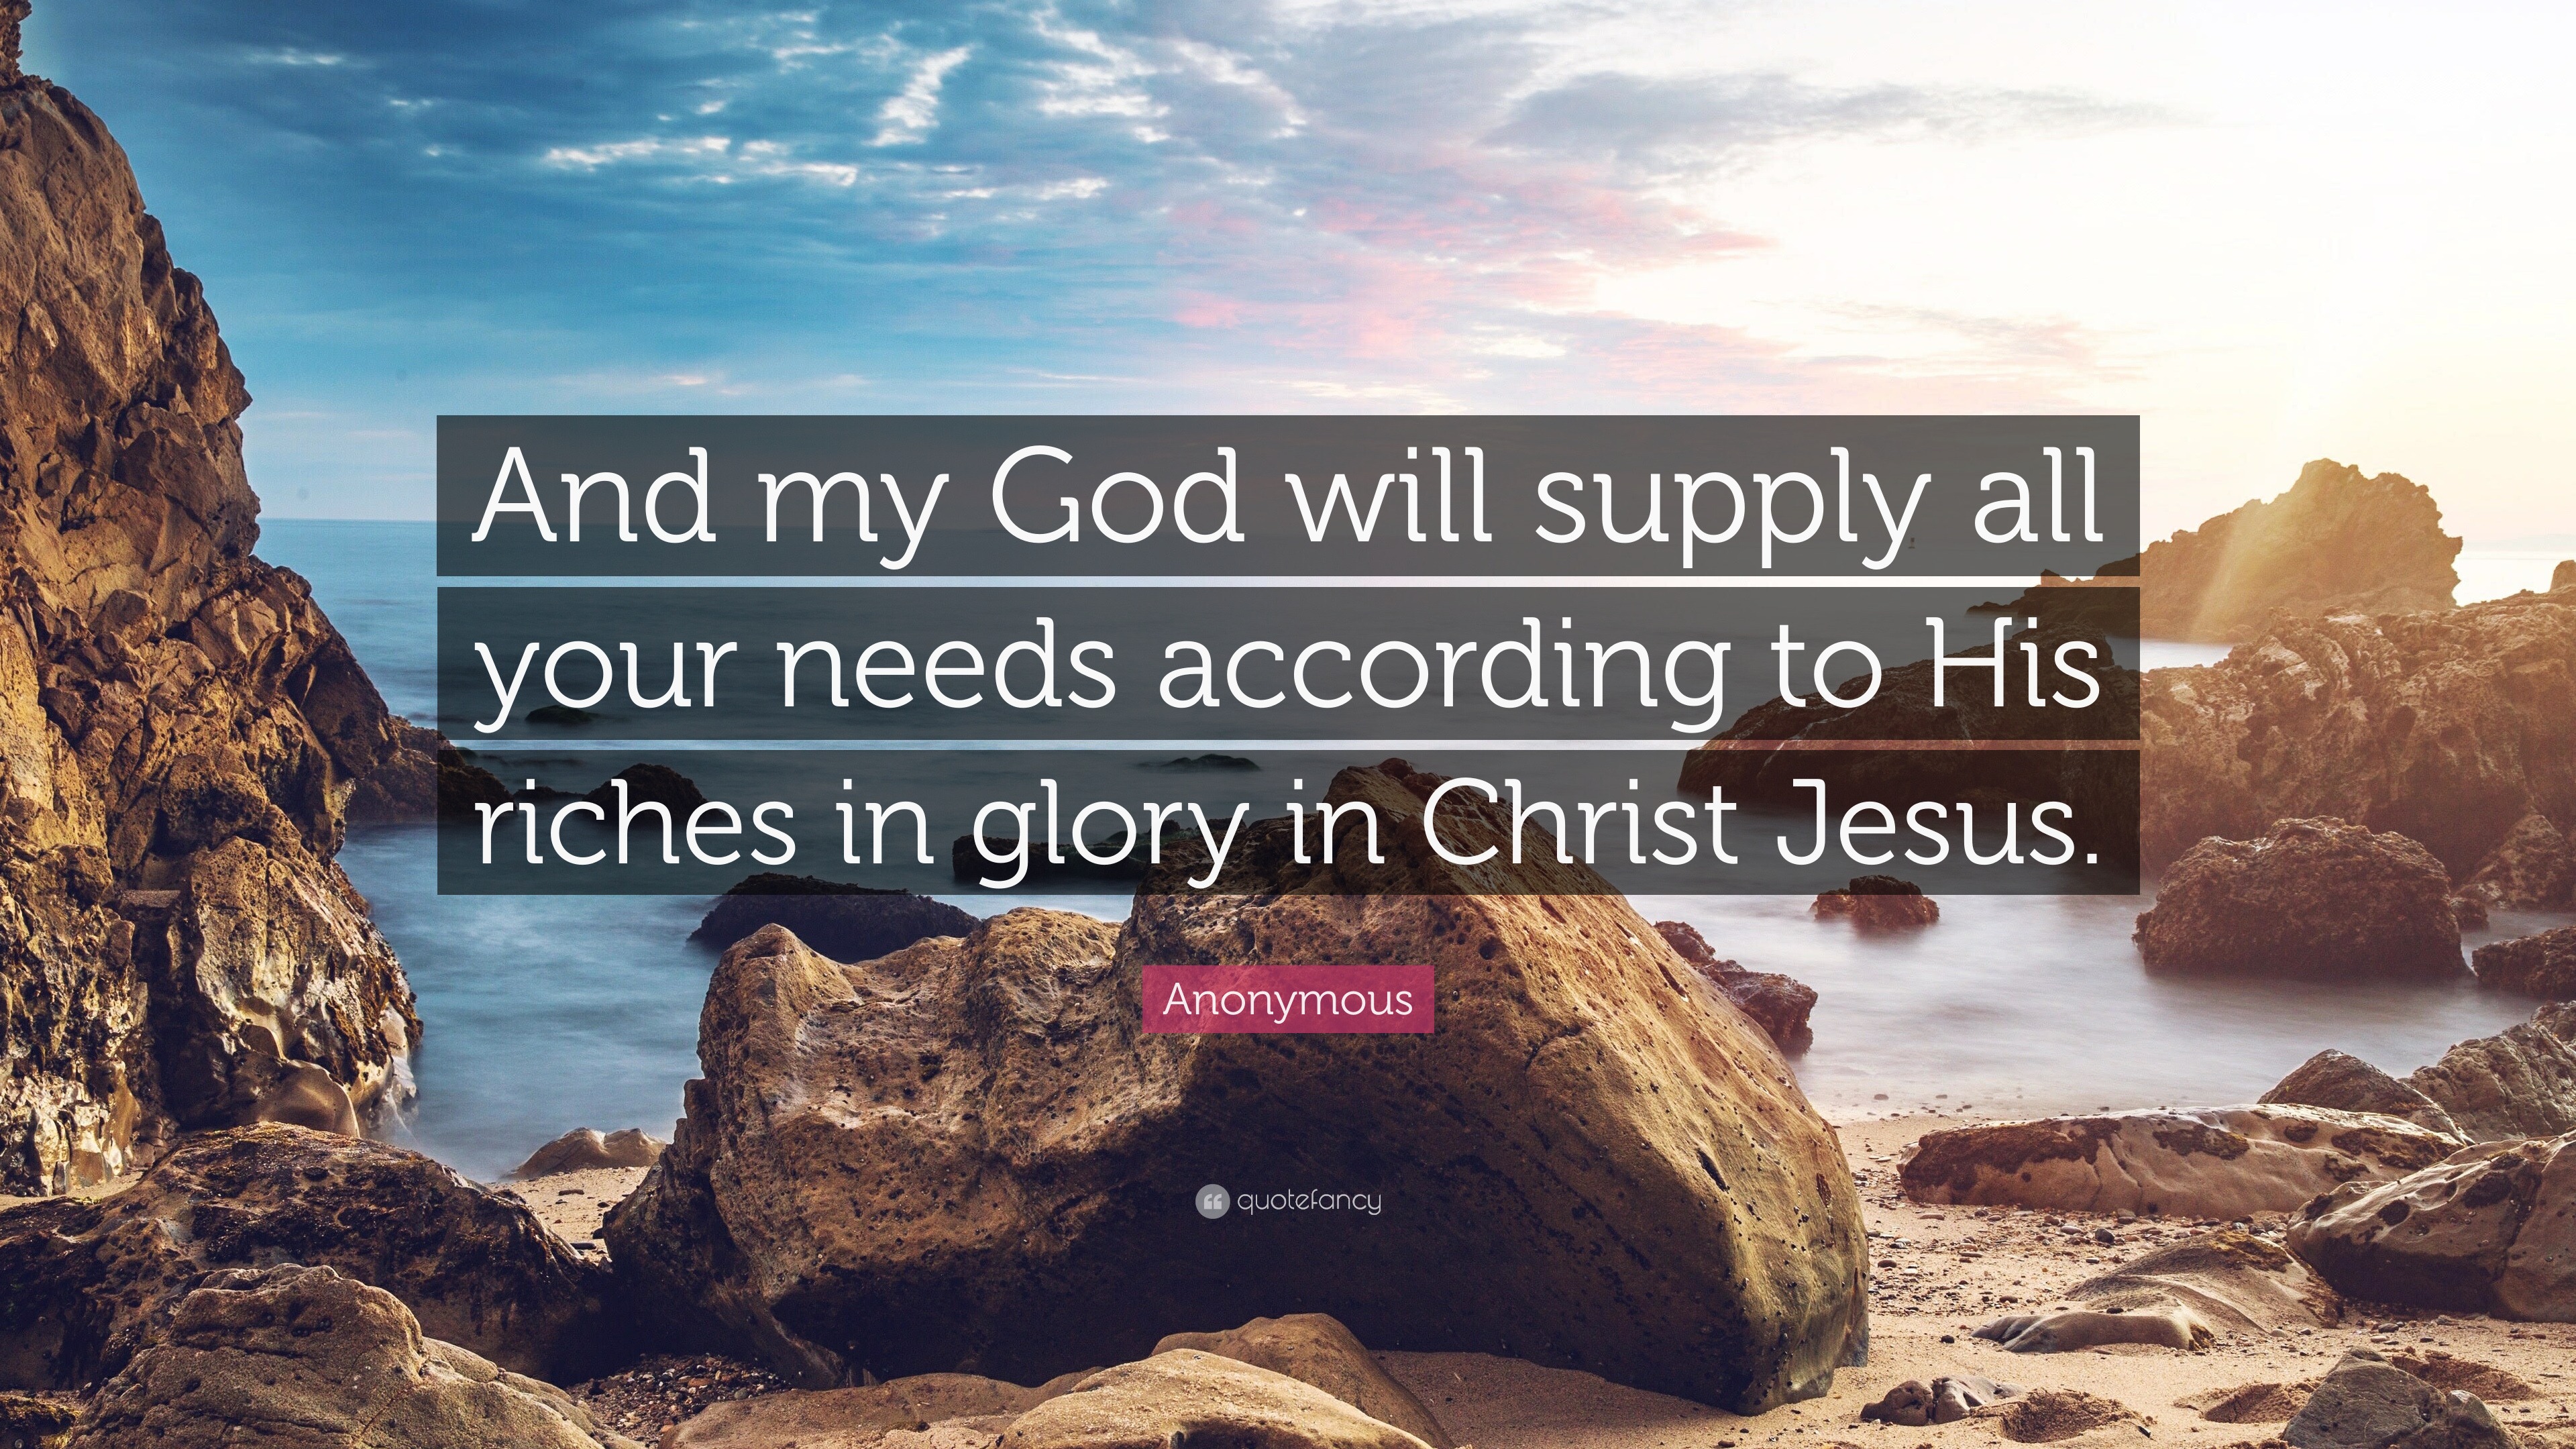 Anonymous Quote And My God Will Supply All Your Needs According To His Riches In Glory